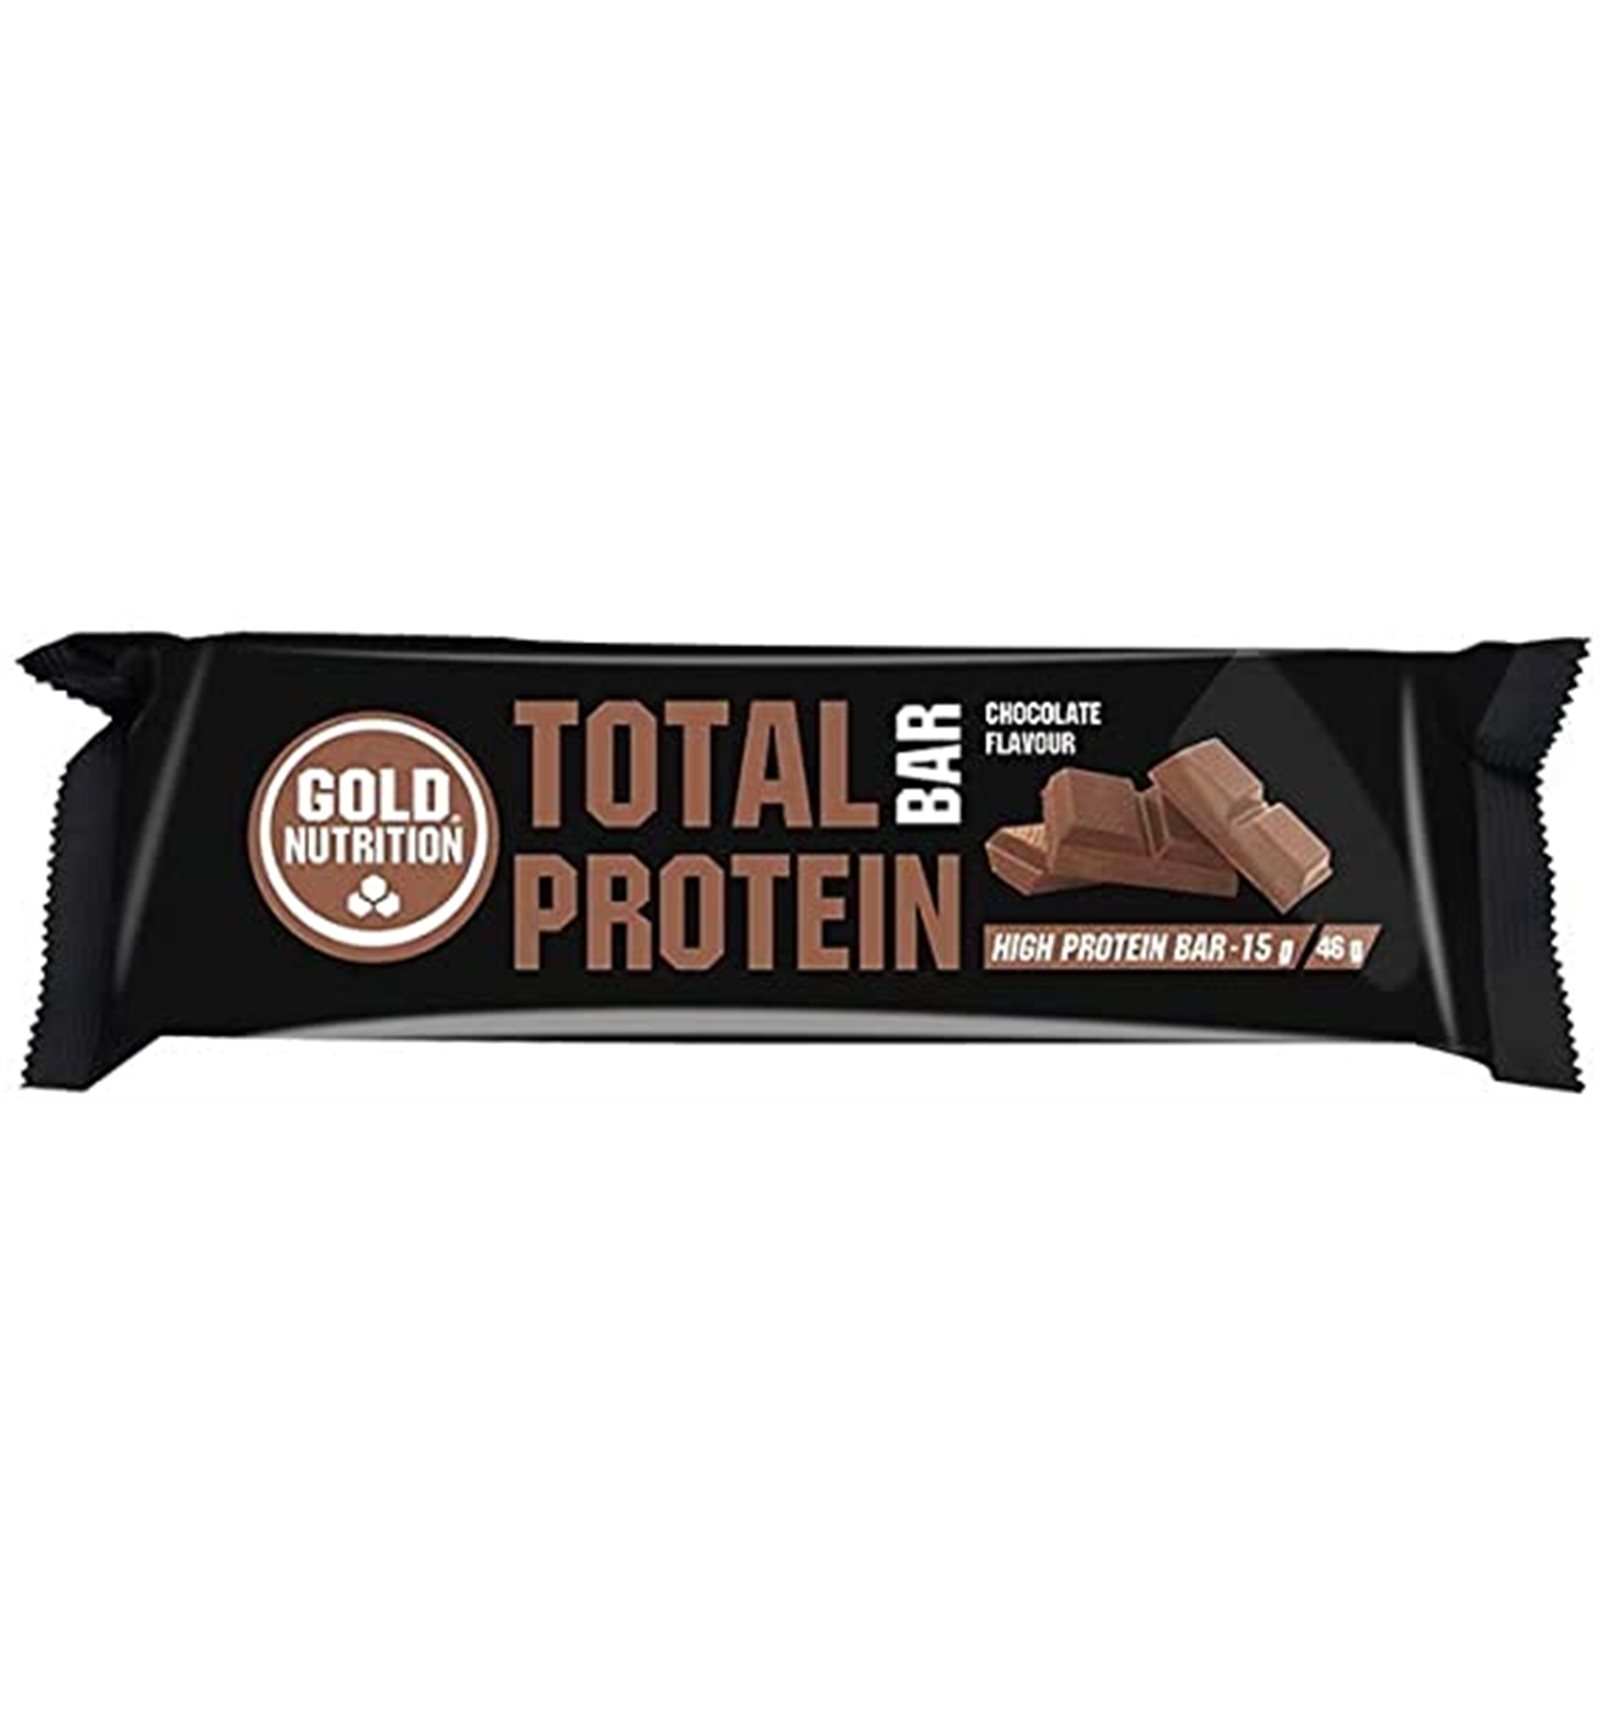 TOTAL PROTEIN BAR - CHOCOLATE - 46 G